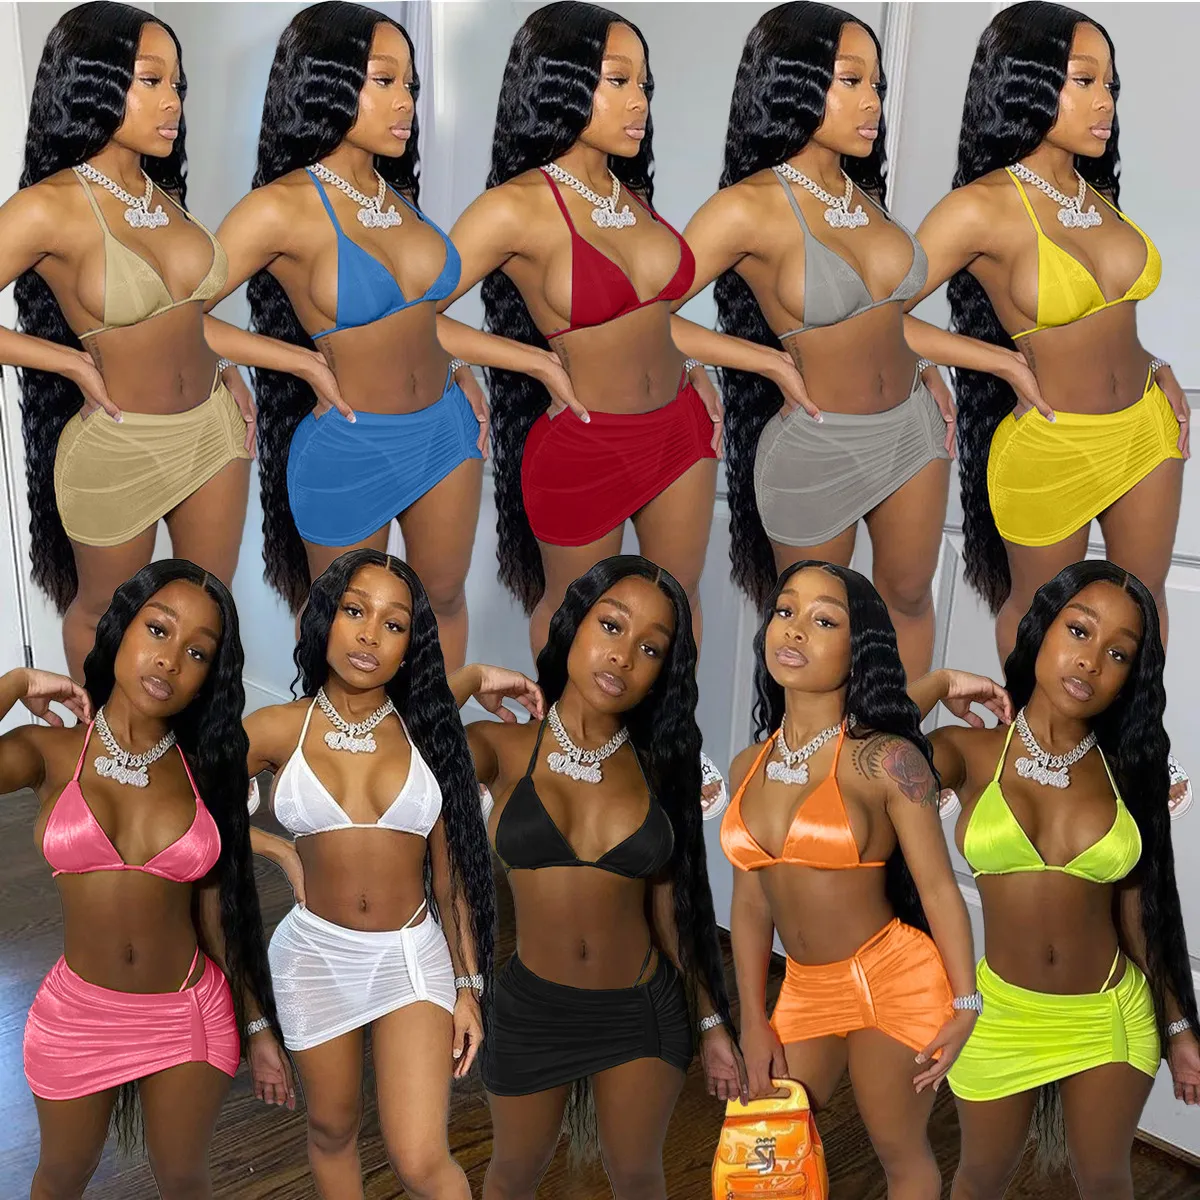 Women tracksuits 2021 spring and summer Designer Fashion women's sexy bikini neck swimsuit three piece sets Slim Solid color suspender Short skirt Outfits